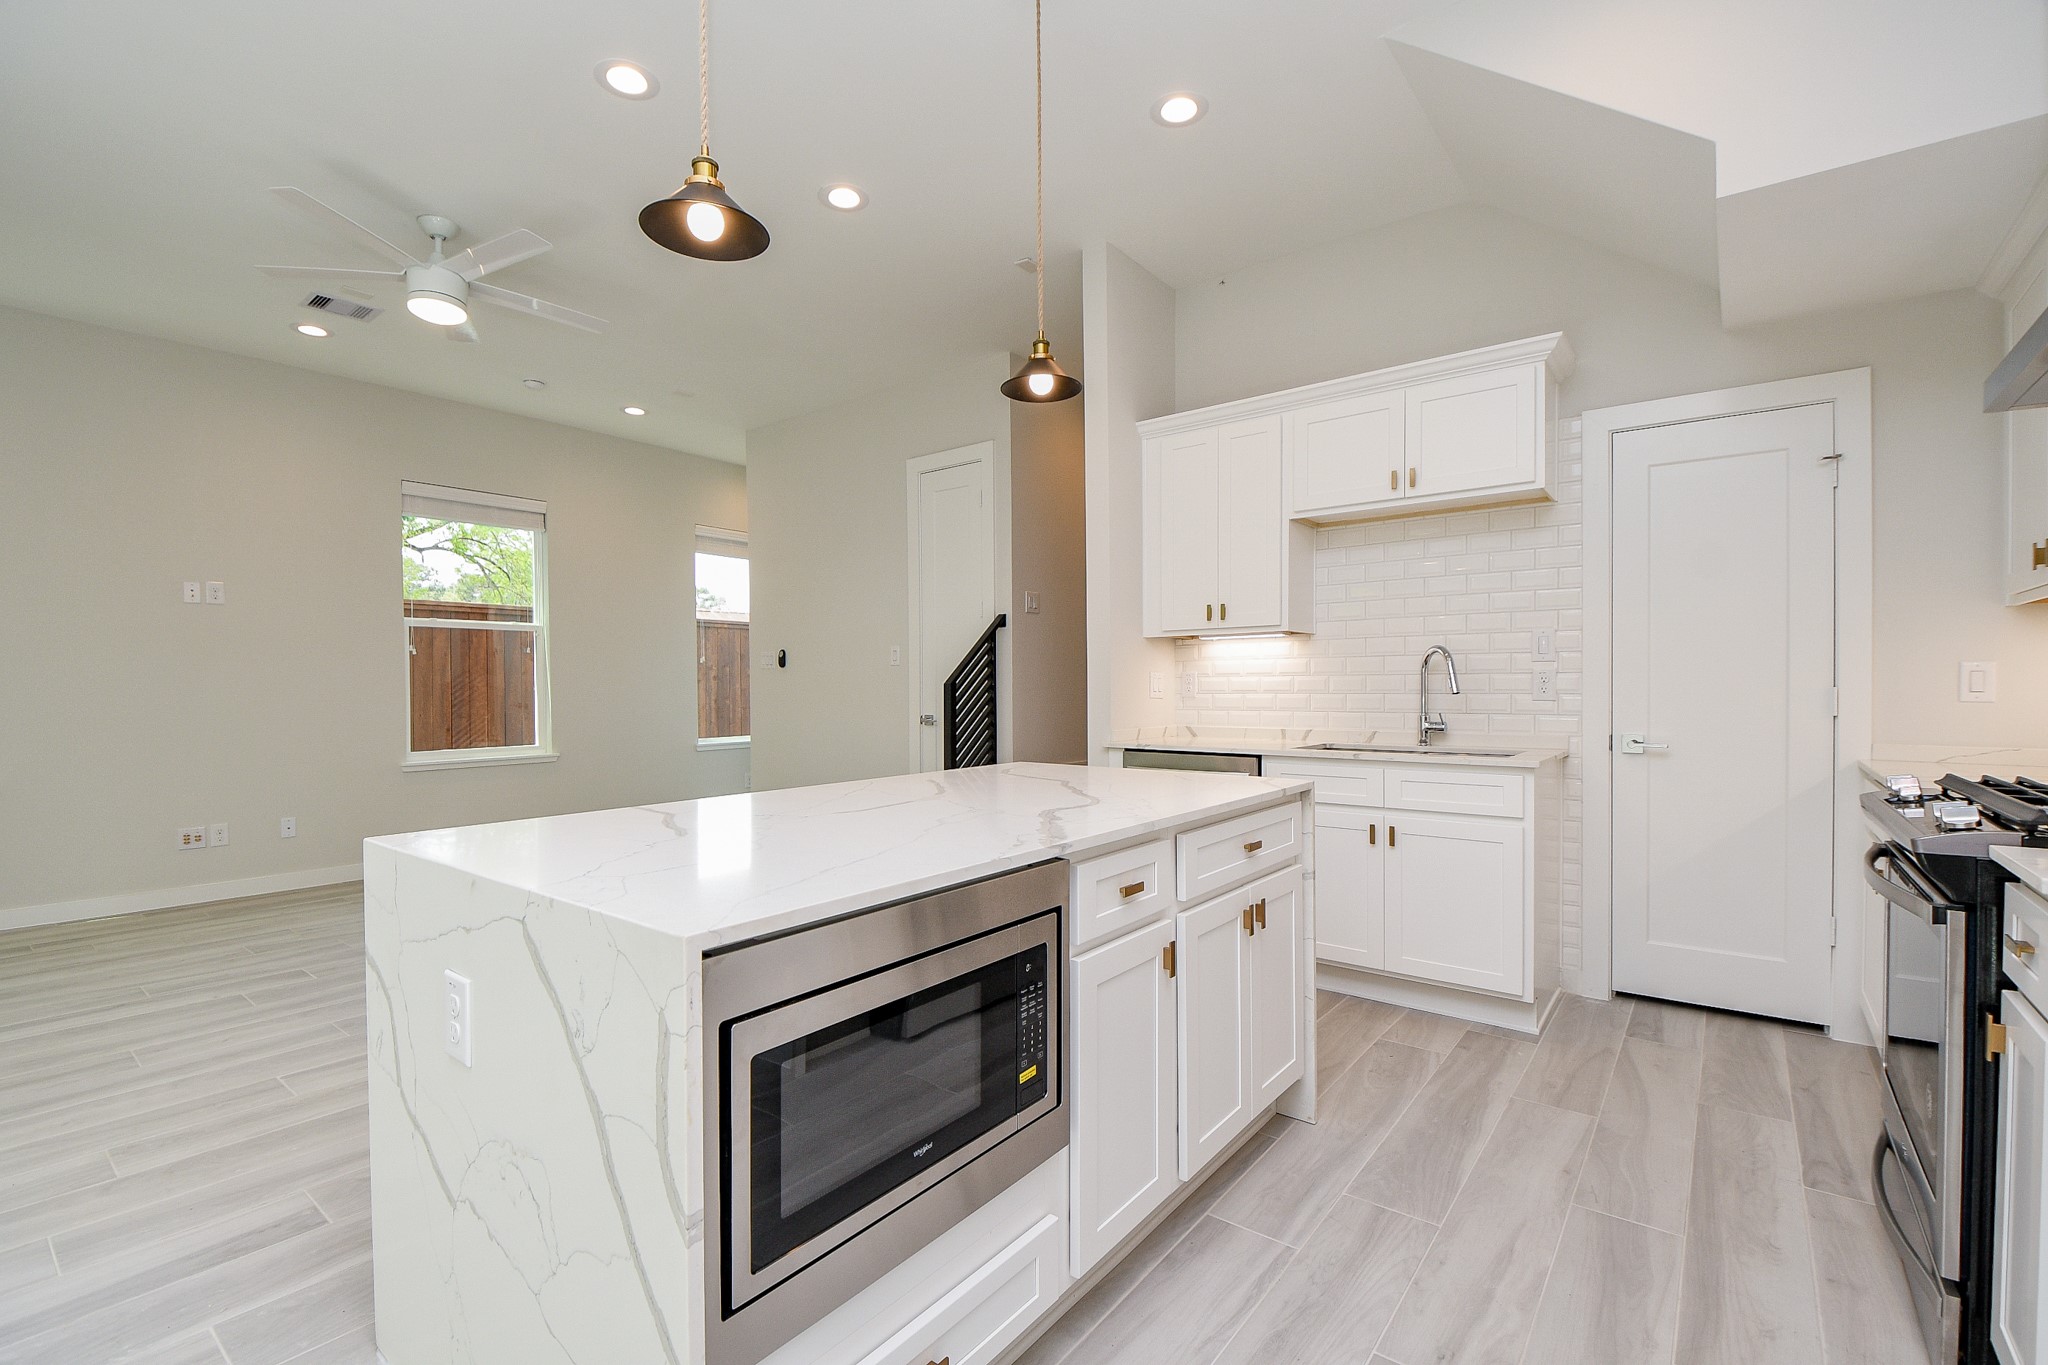 Kitchen to have same cabinets, finishes, and waterfall island as this recently completed home by same developer*